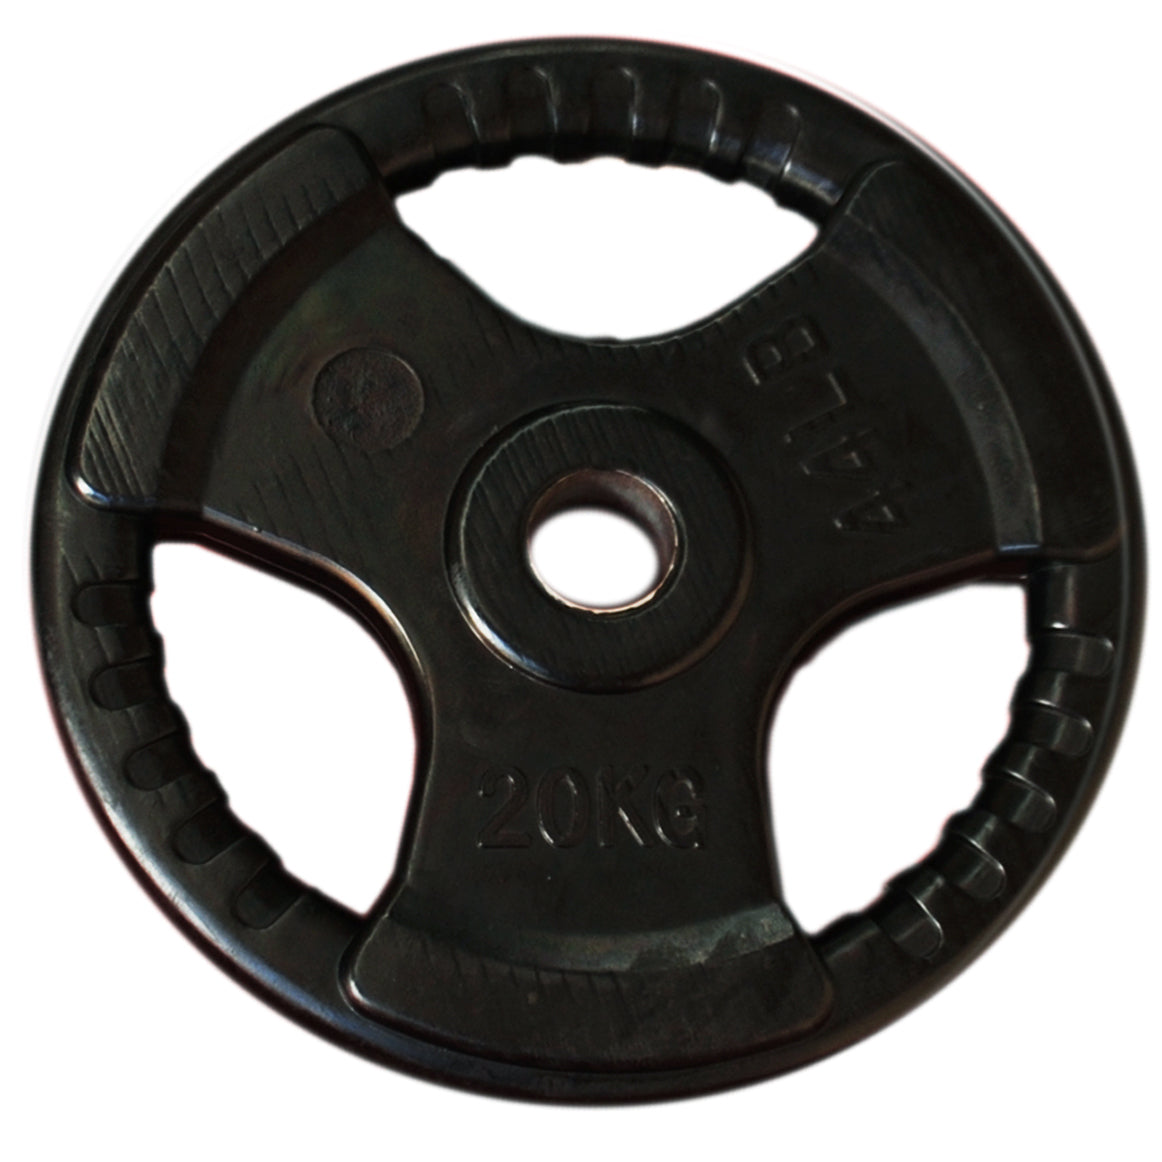 20kg Olympic Size Rubber Coated Weight Plate